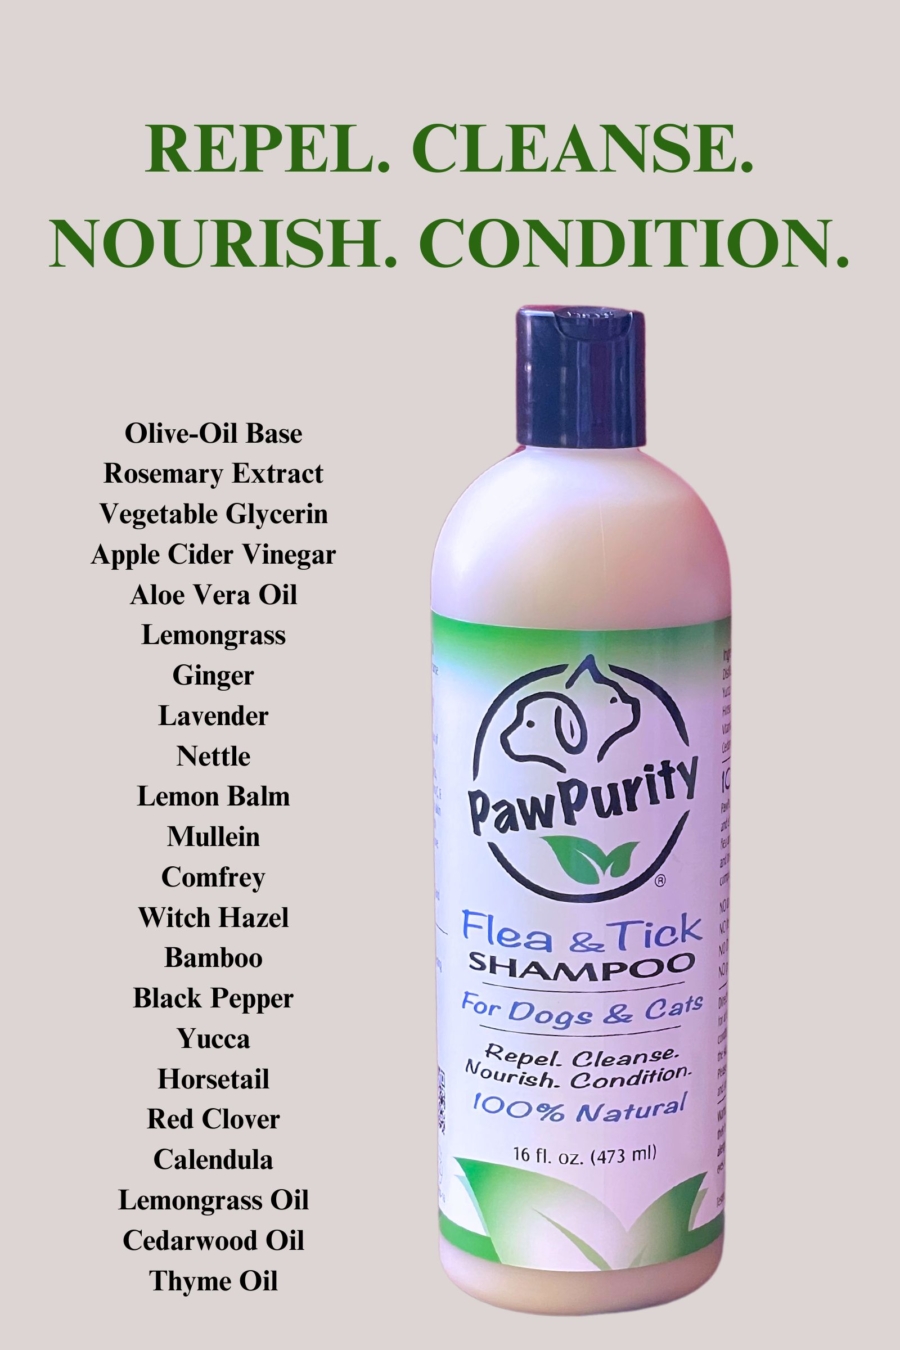 PawPurity Flea & Tick Shampoo with list of 100% natural ingredients